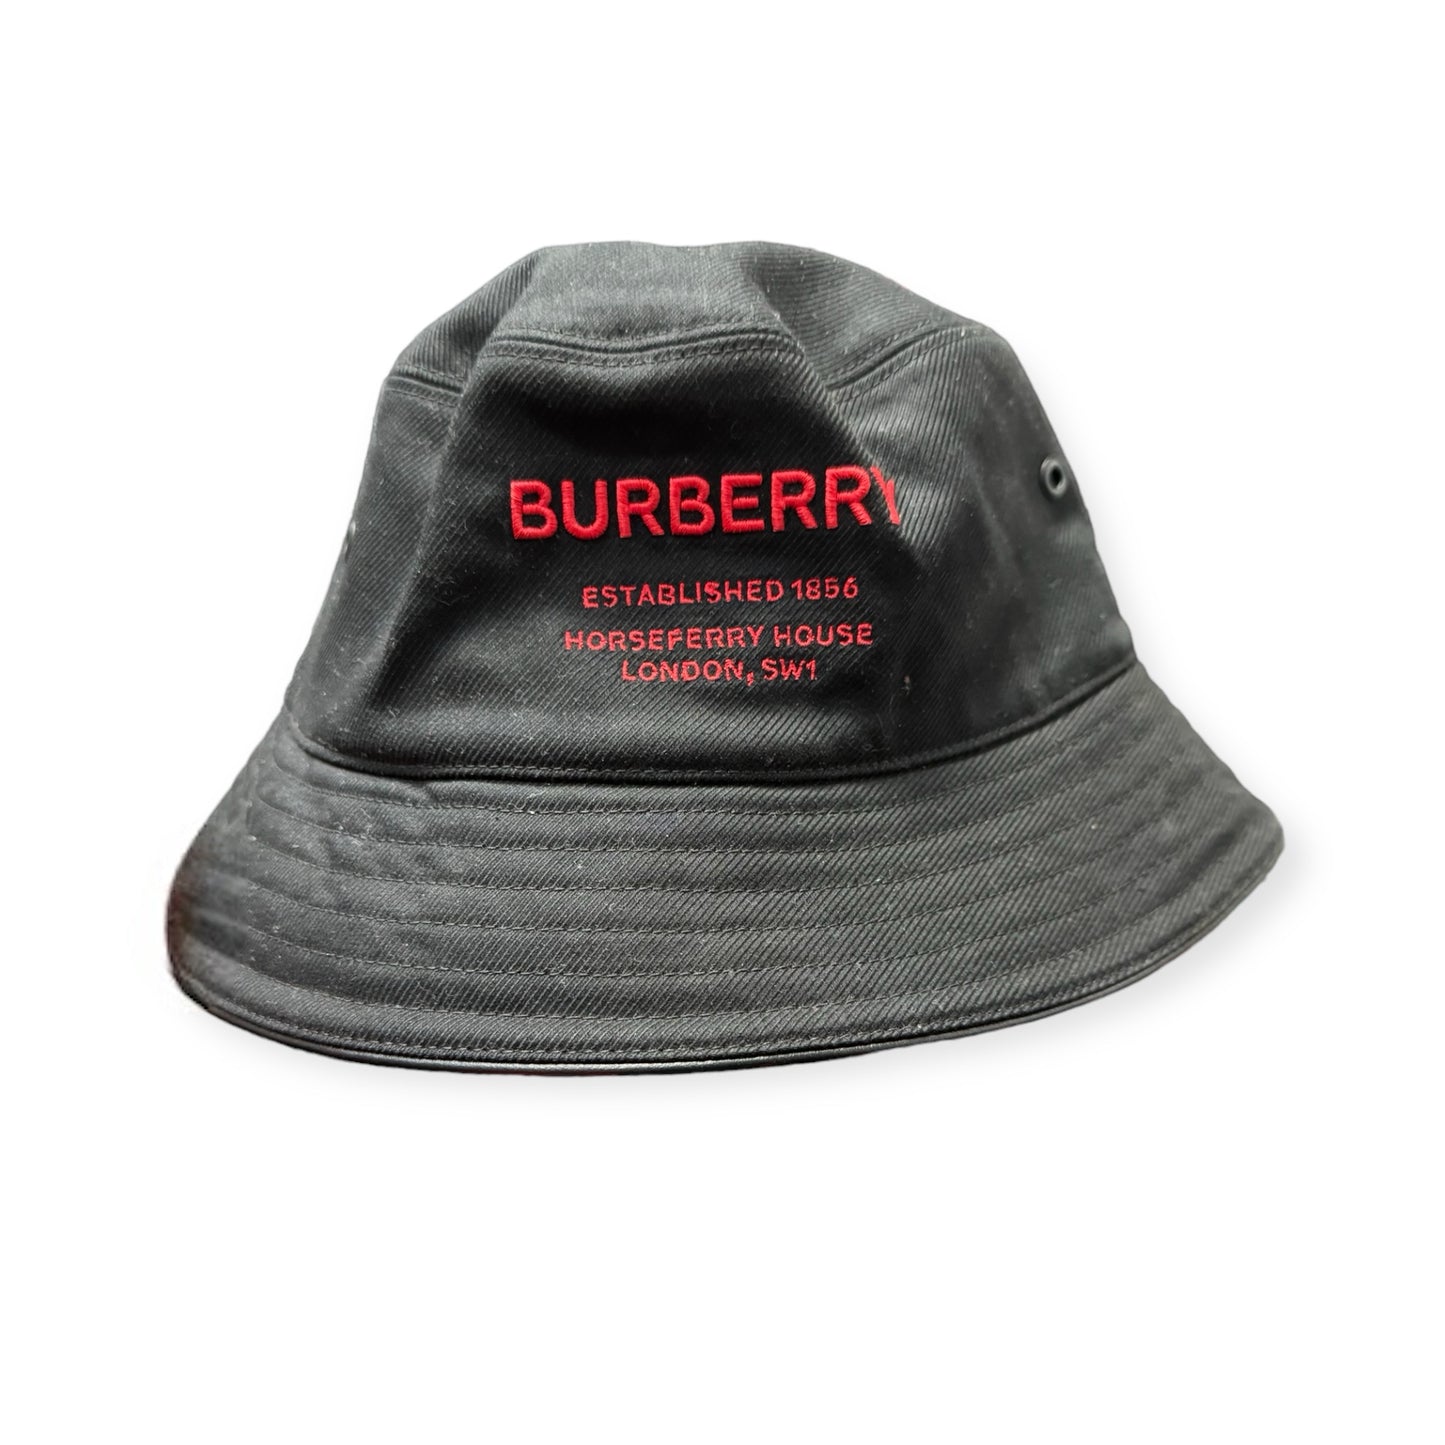 Burberry Black Bucket Hat size Small